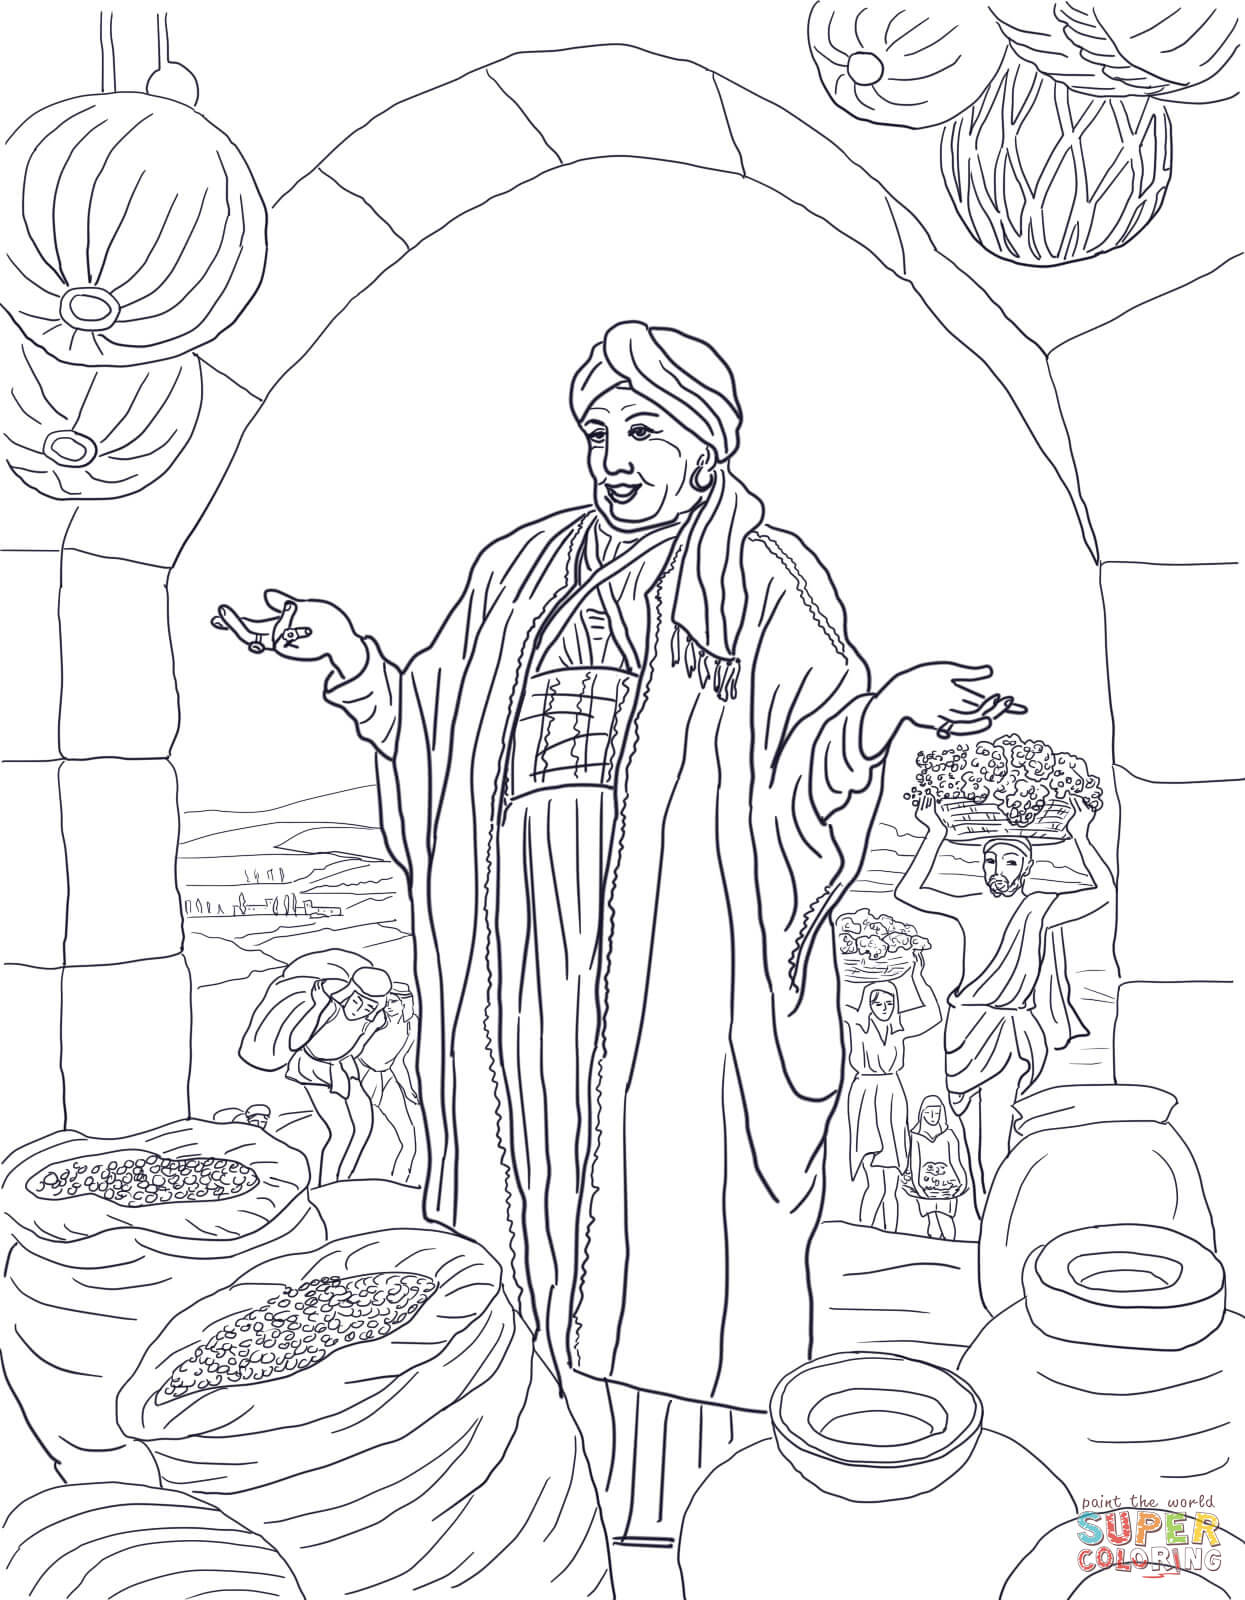 Parable of the Rich Fool coloring page | Free Printable Coloring Pages